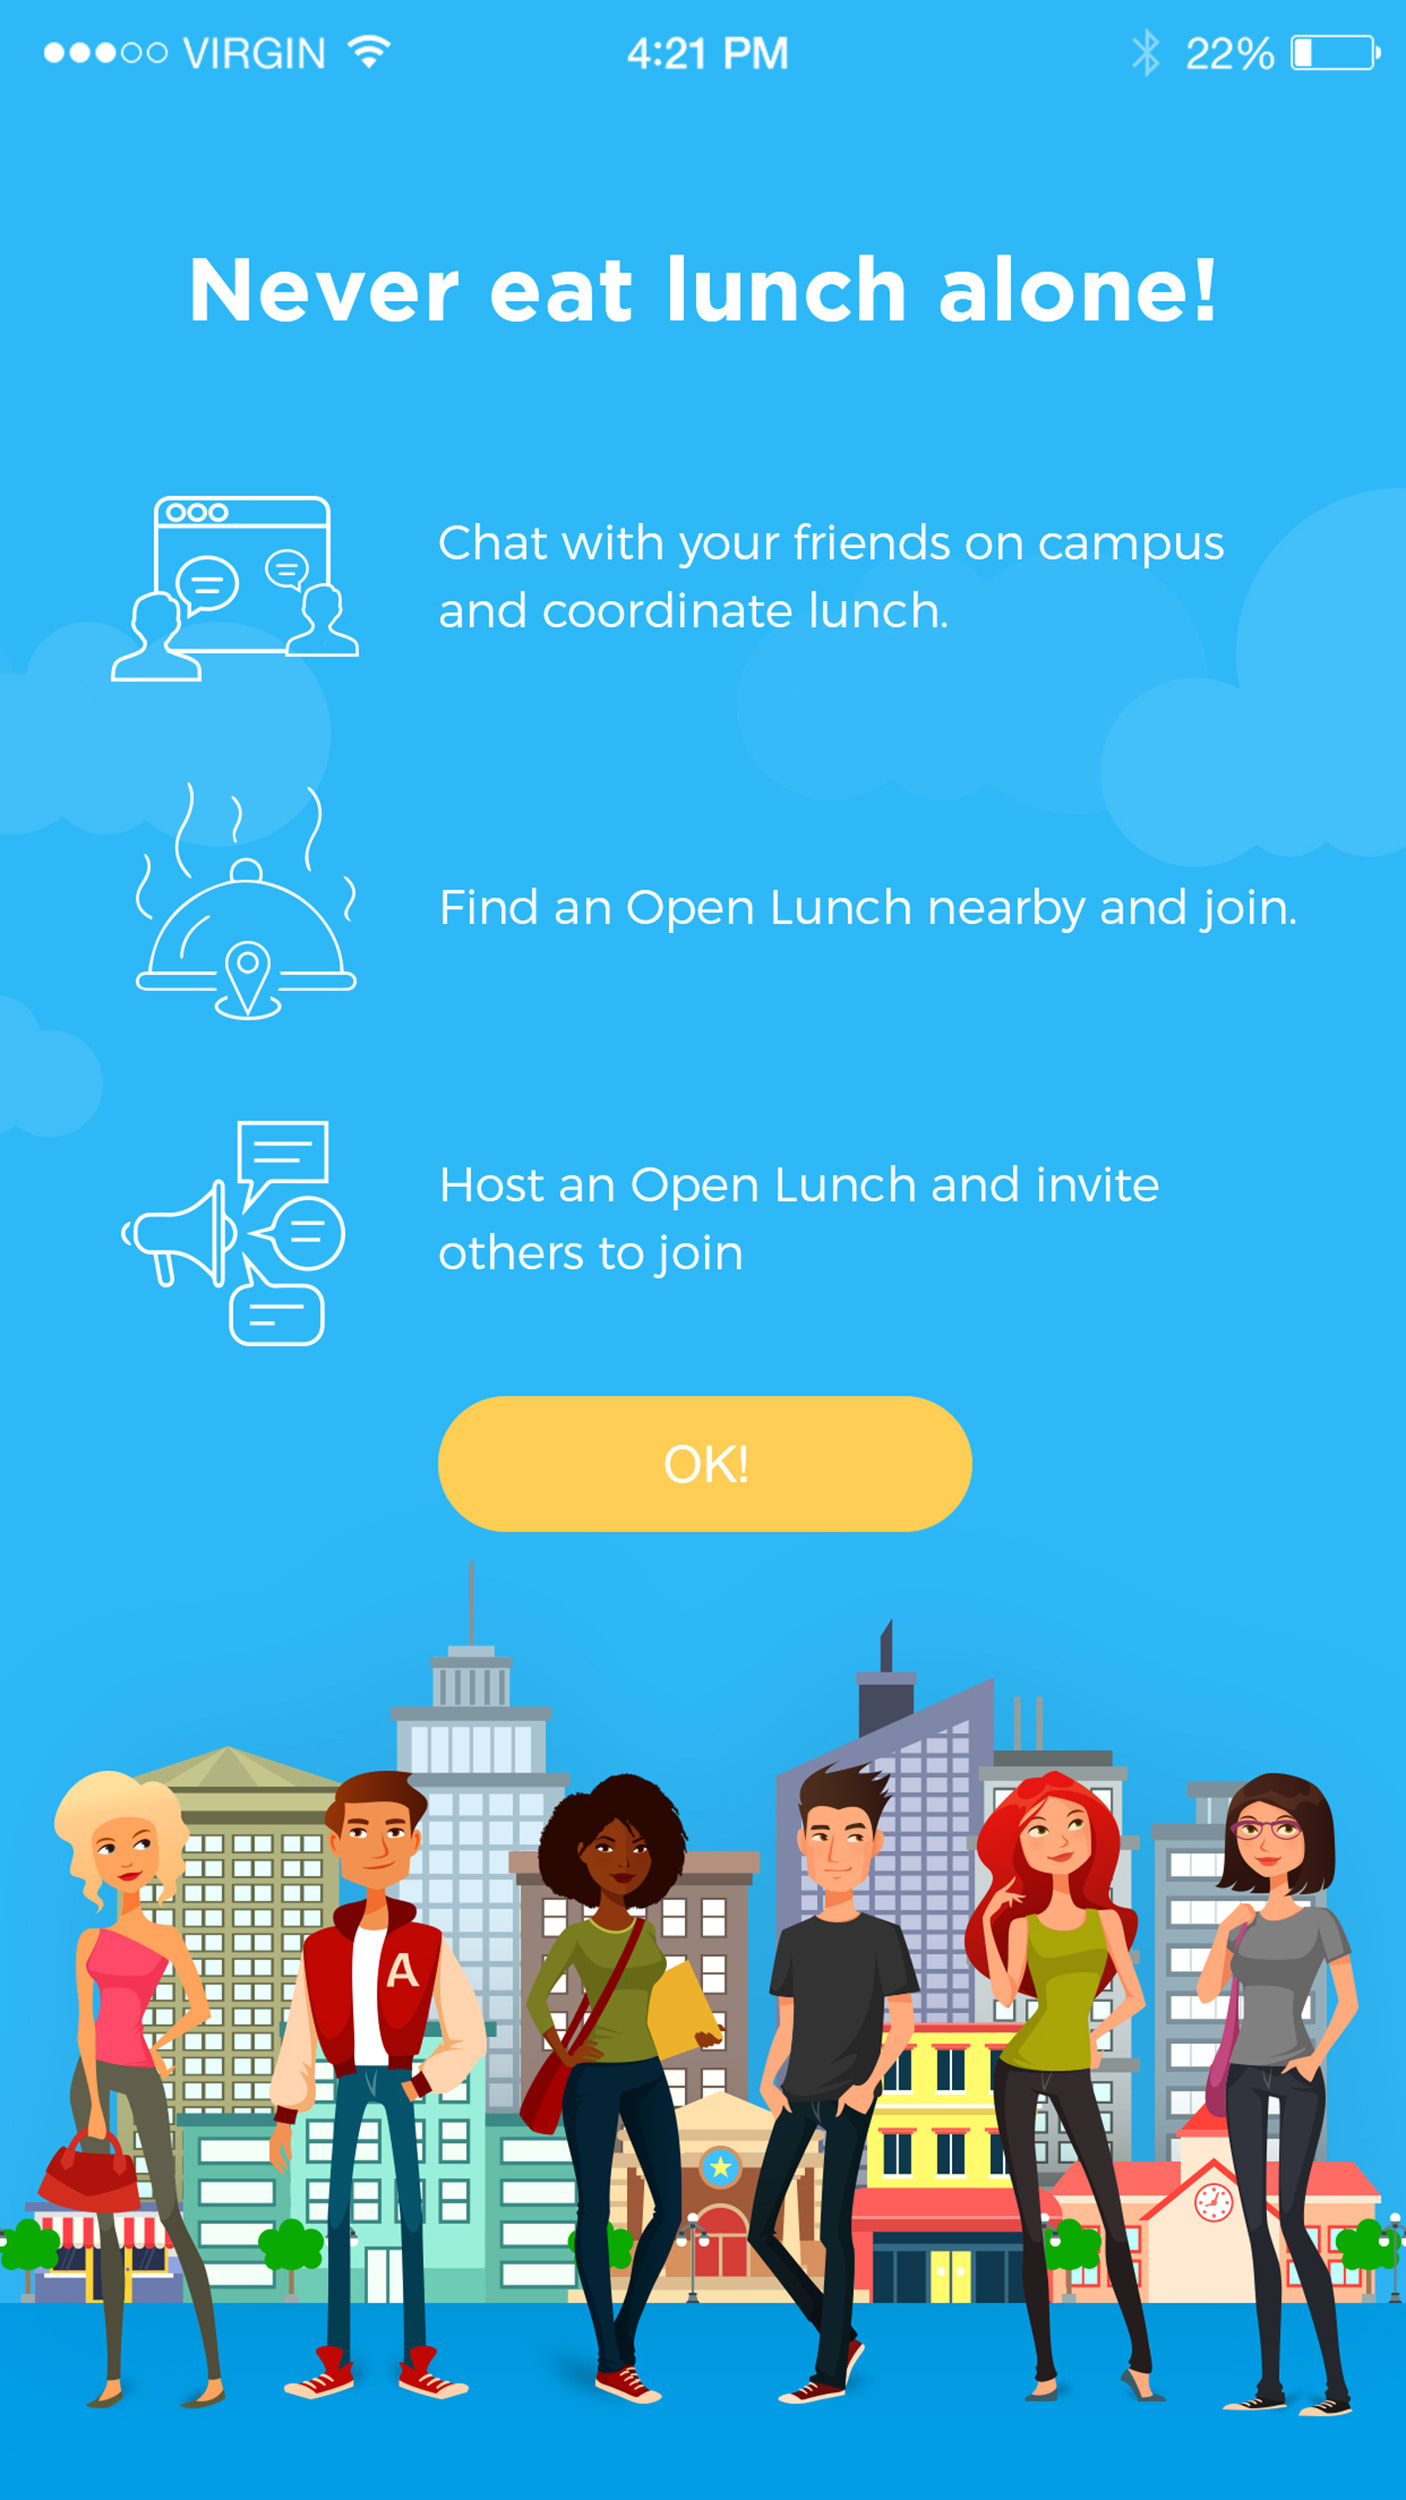 New app gets students hooked on local restaurants, A And E